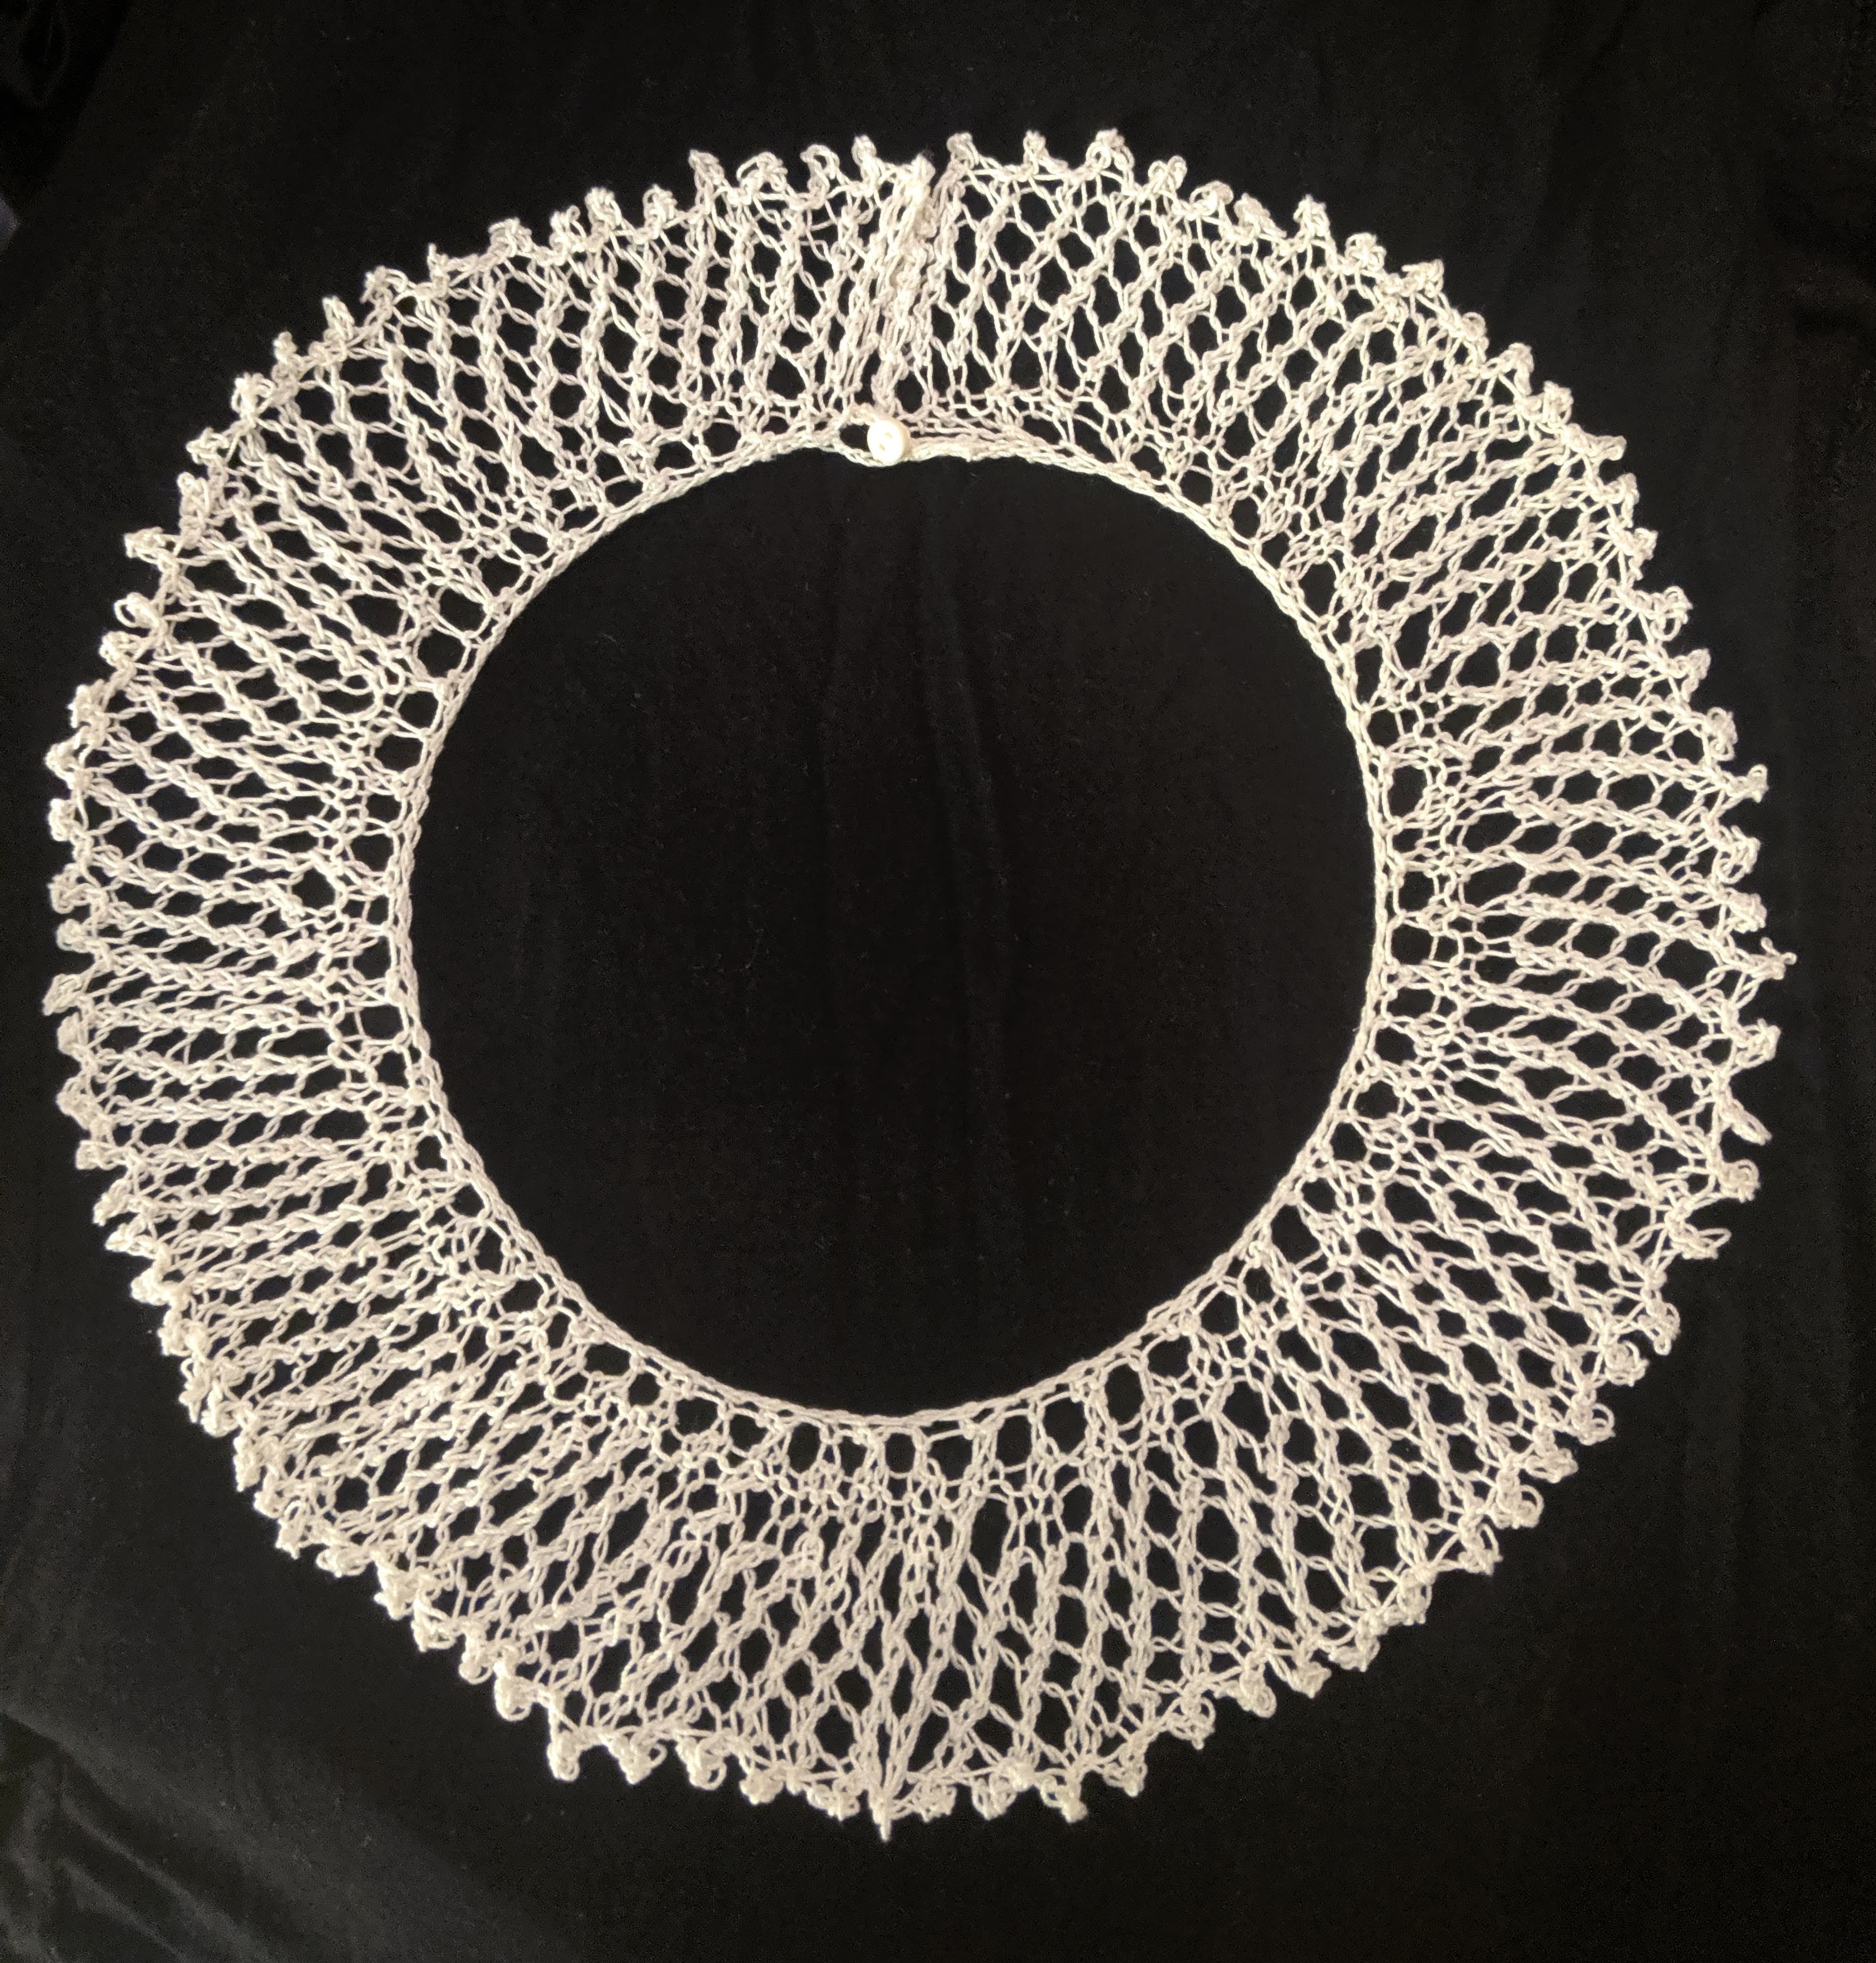 Photograph of knit collar in white yarn against black backdrop